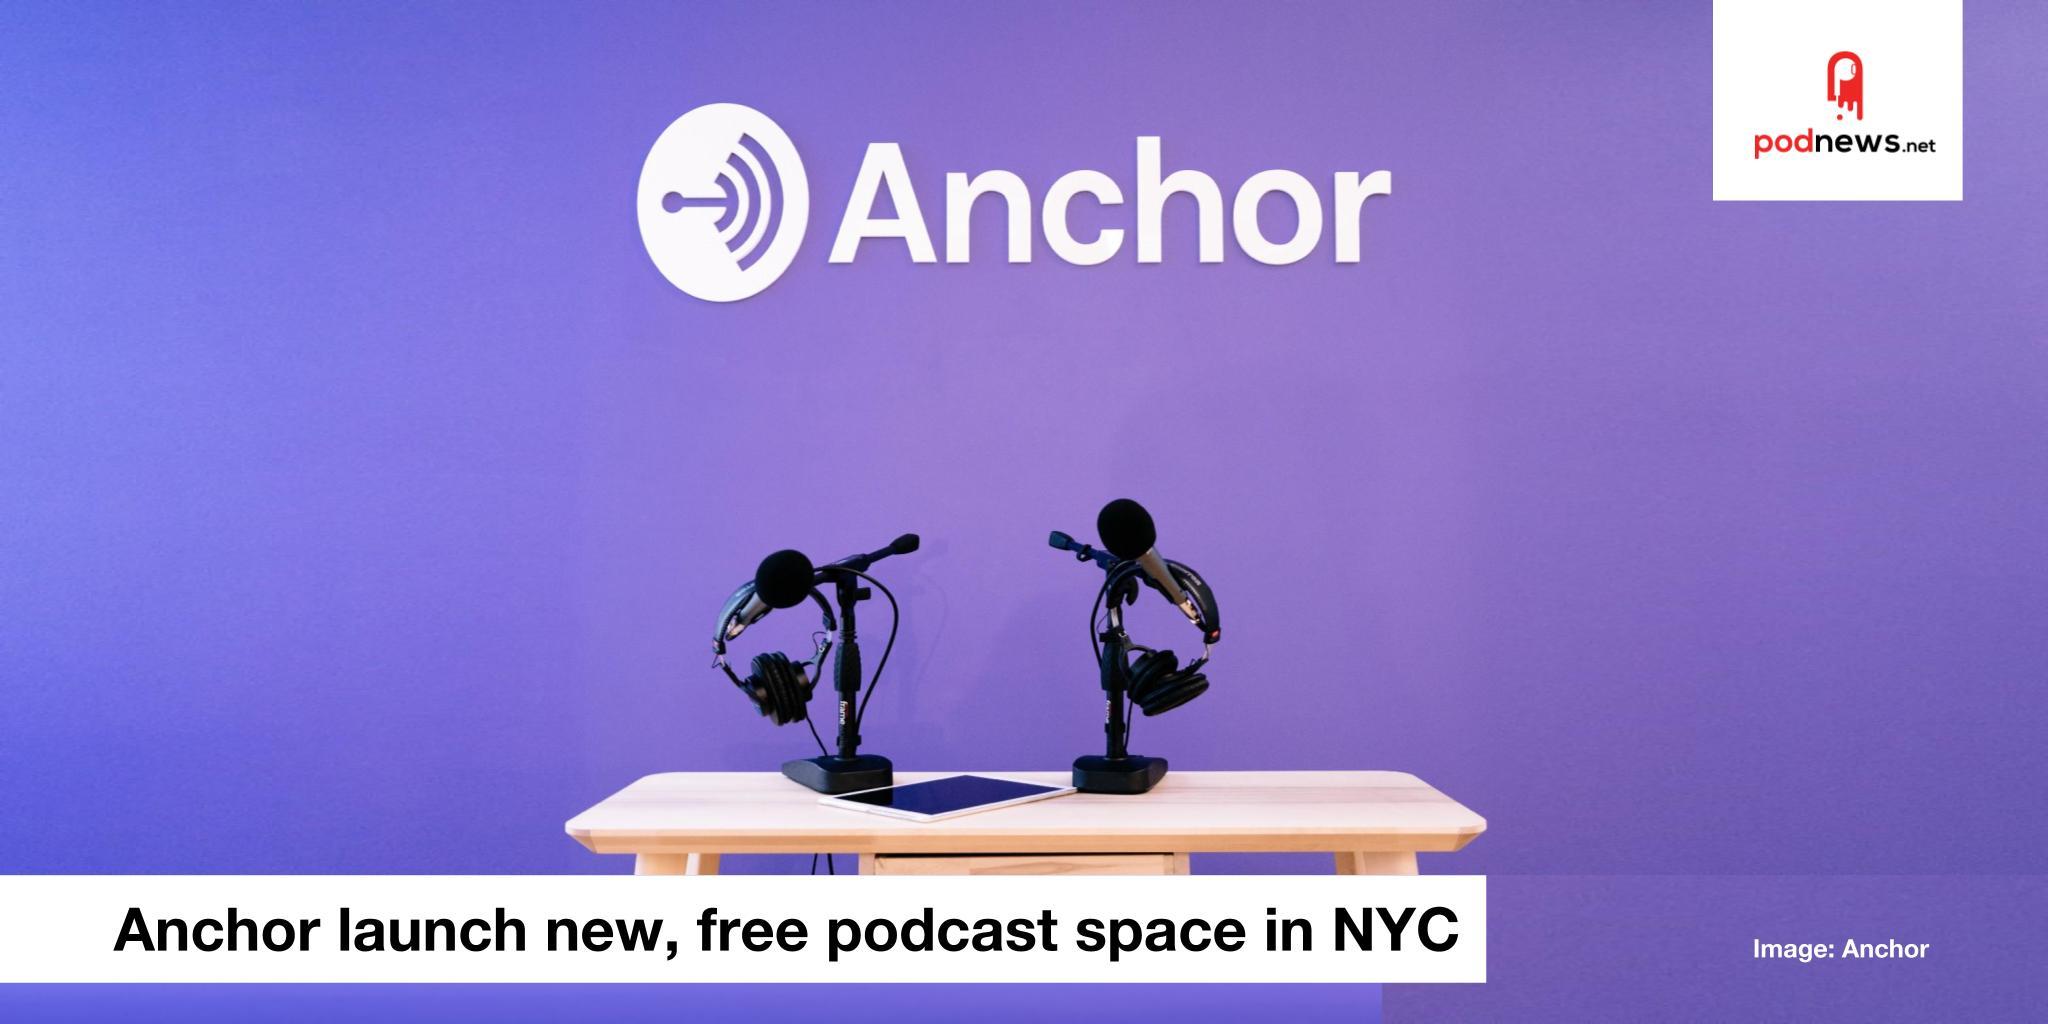 anchor podcast pricing